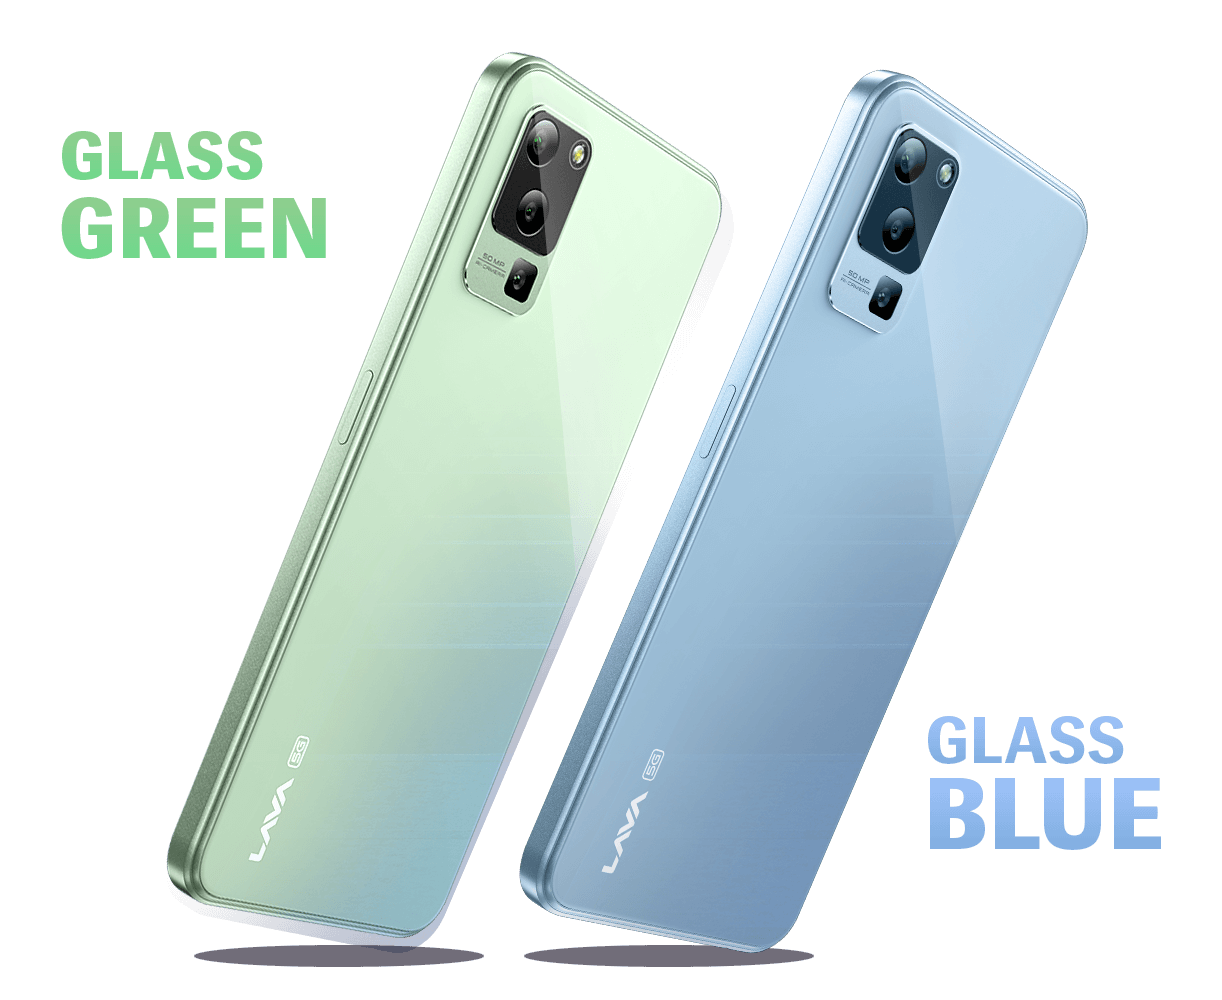 LAVA Blaze 1X 5G Rumored Specs Revealed: 5000 mAh Battery, 15W Fast Charging,  and More | Tech Times